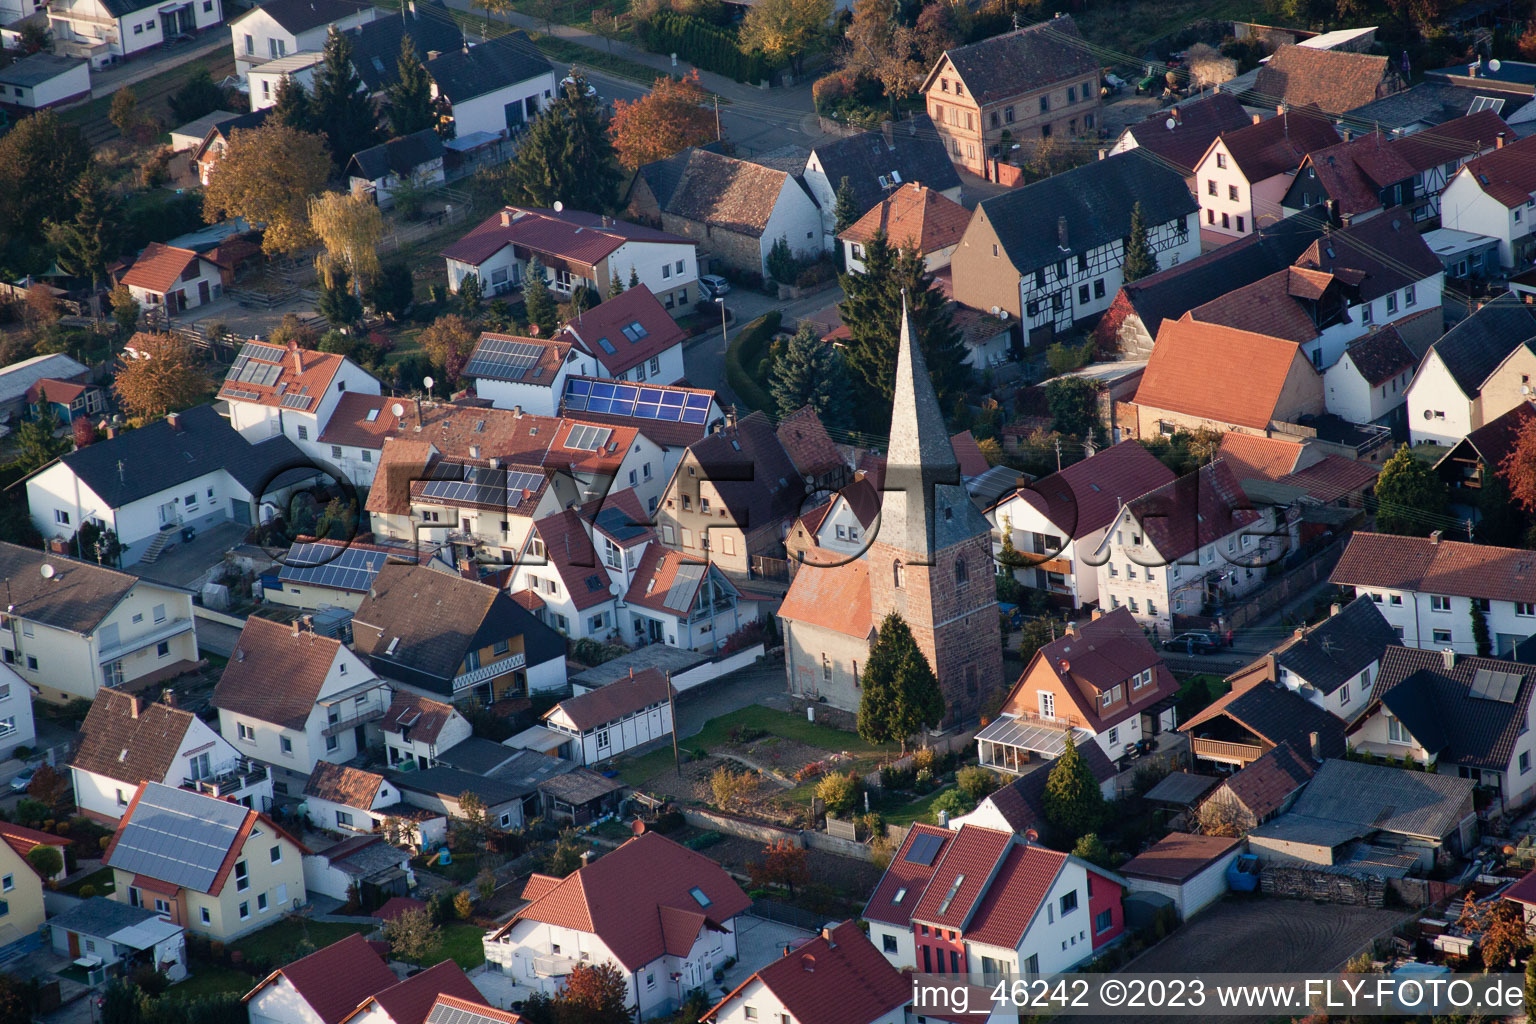 Essingen in the state Rhineland-Palatinate, Germany from a drone